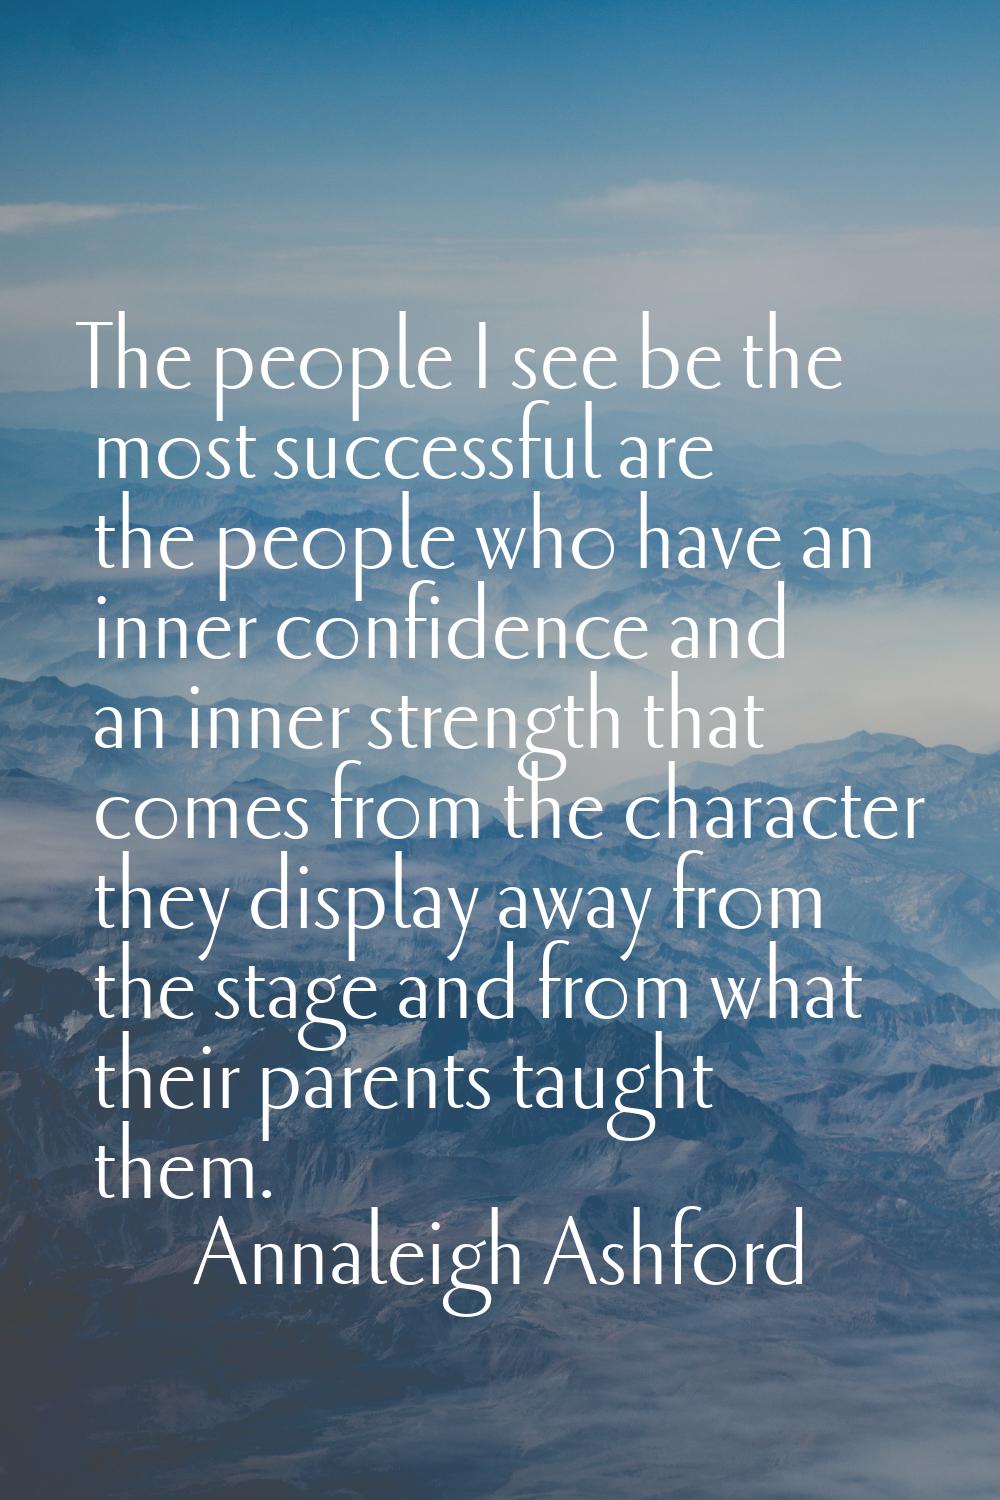 The people I see be the most successful are the people who have an inner confidence and an inner st